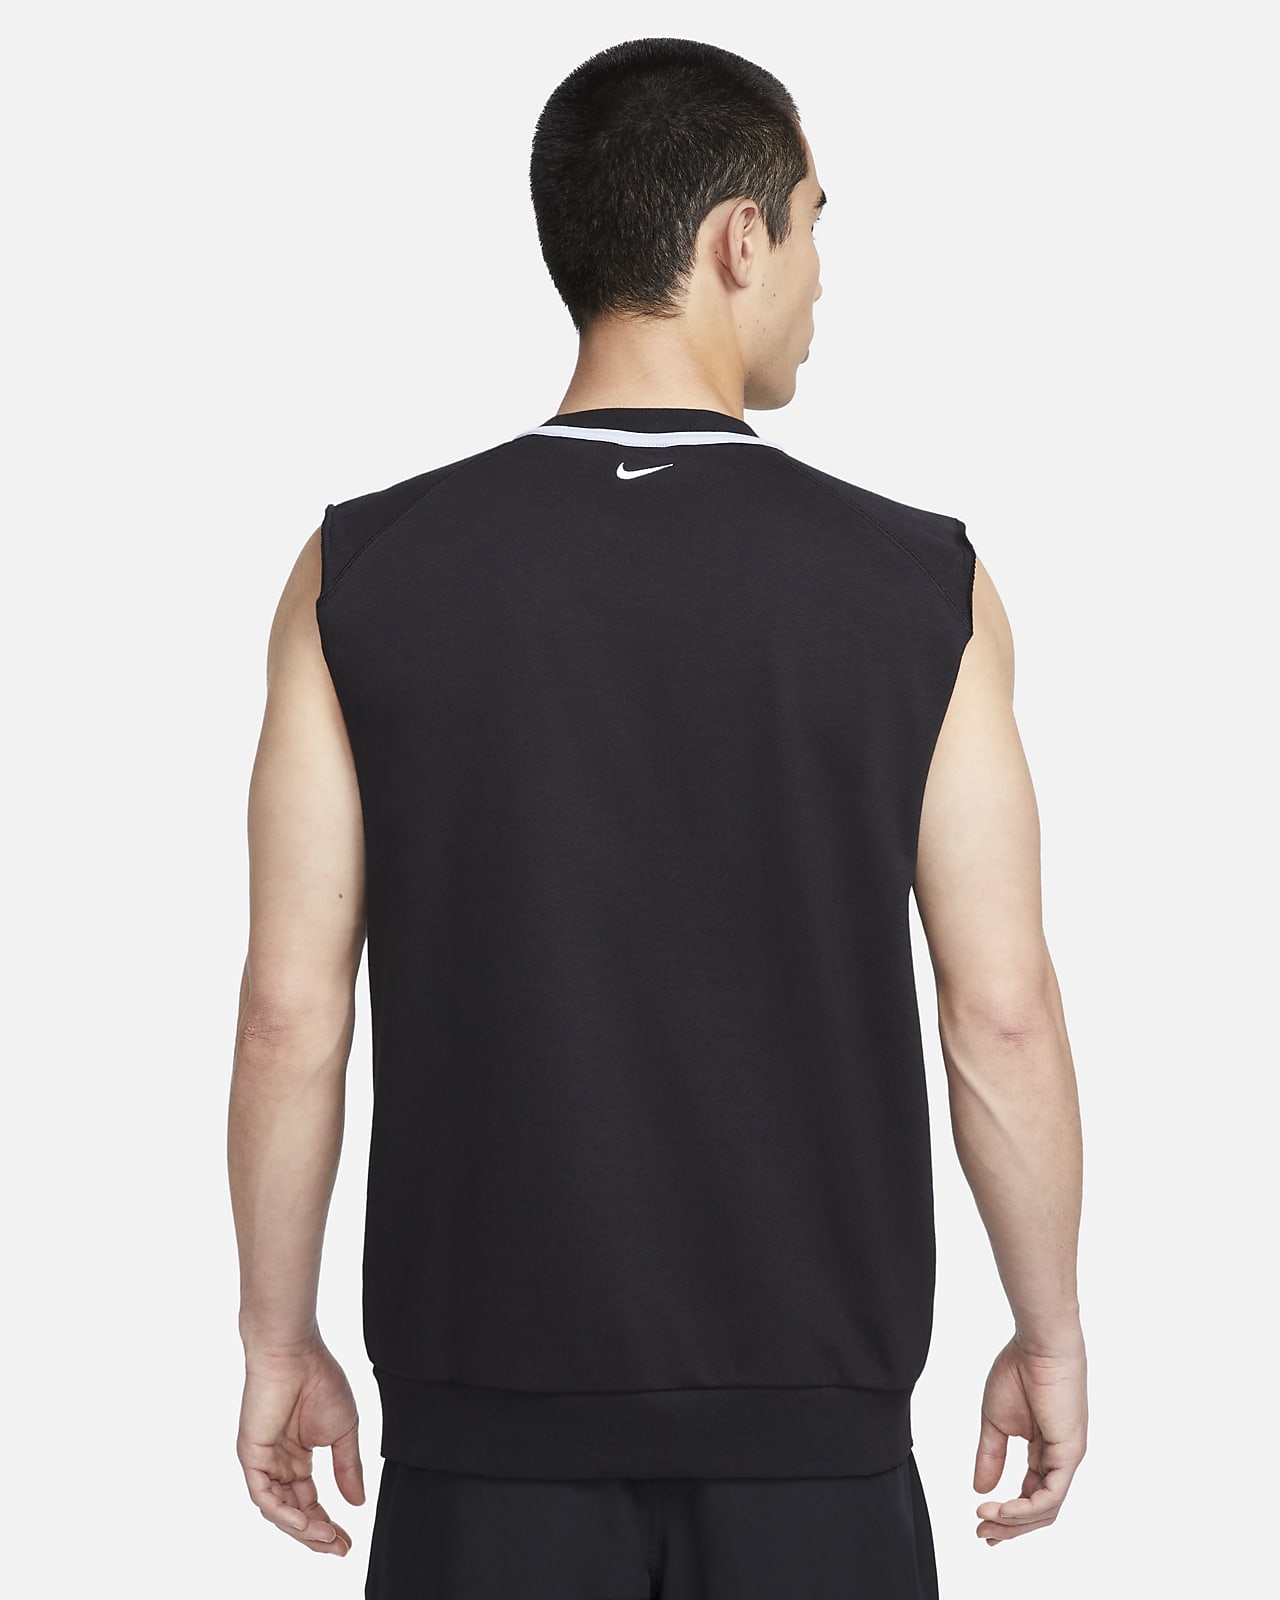 https://static.nike.com/a/images/t_PDP_1280_v1/f_auto,q_auto:eco/7b248839-f481-4d88-b5ac-f8c7ac4341ac/dri-fit-sleeveless-fleece-fitness-top-X6G84D.png